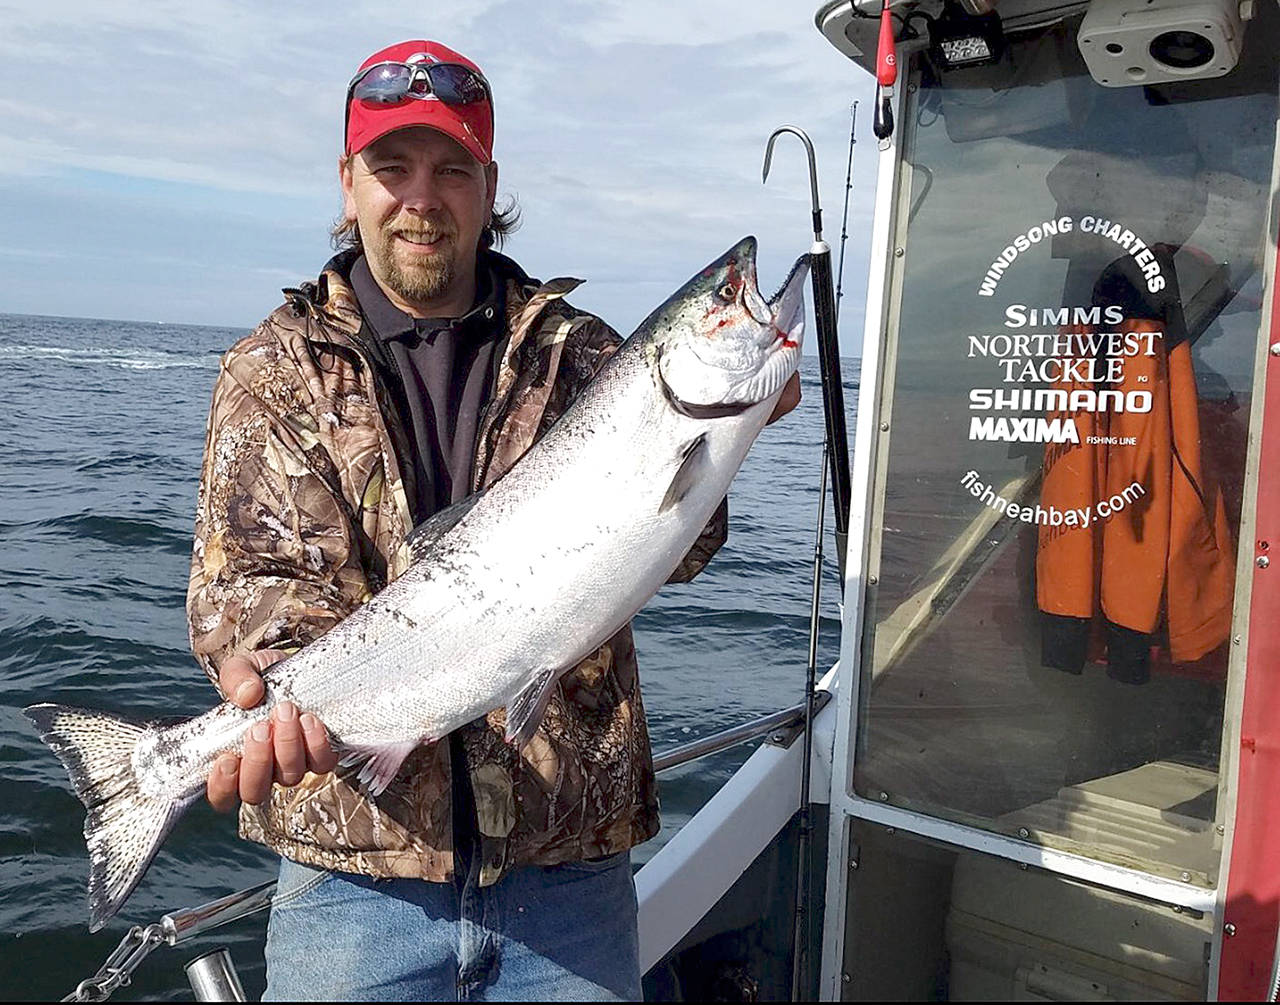 Windsong Charters Port Angeles angler Roger Saari caught this chinook this summer while fishing Swiftsure Bank with Neah Bay’s Windsong Charters. All chinook retention is now closed in Marine Area 4.